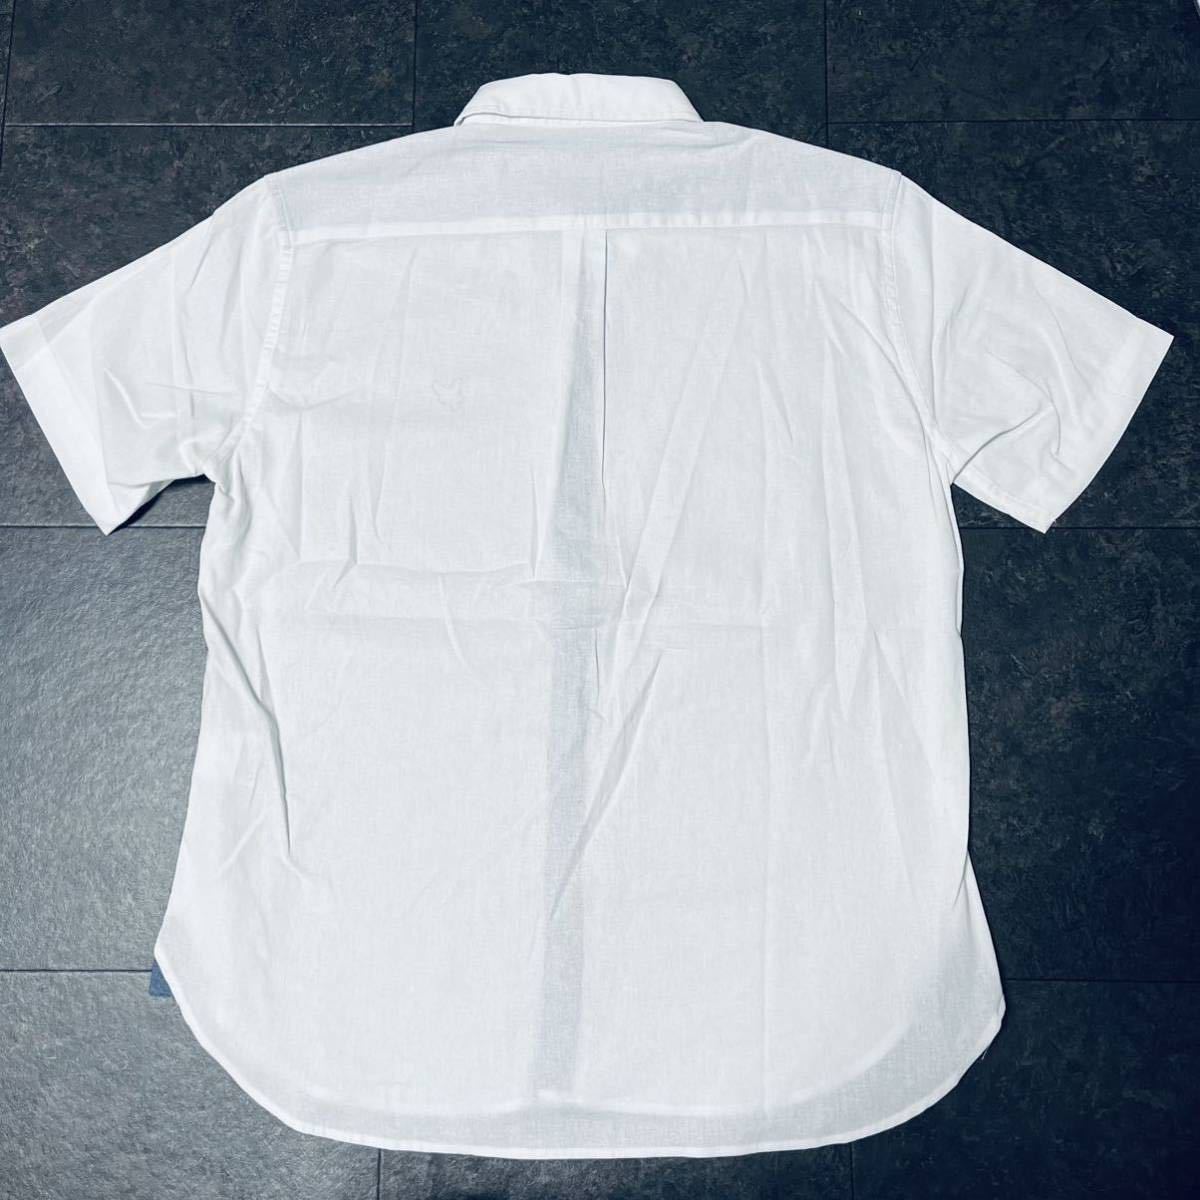 M size la il and Scott short sleeves shirt men's new goods one Point badge spring summer thin white button down cotton 100% free shipping 